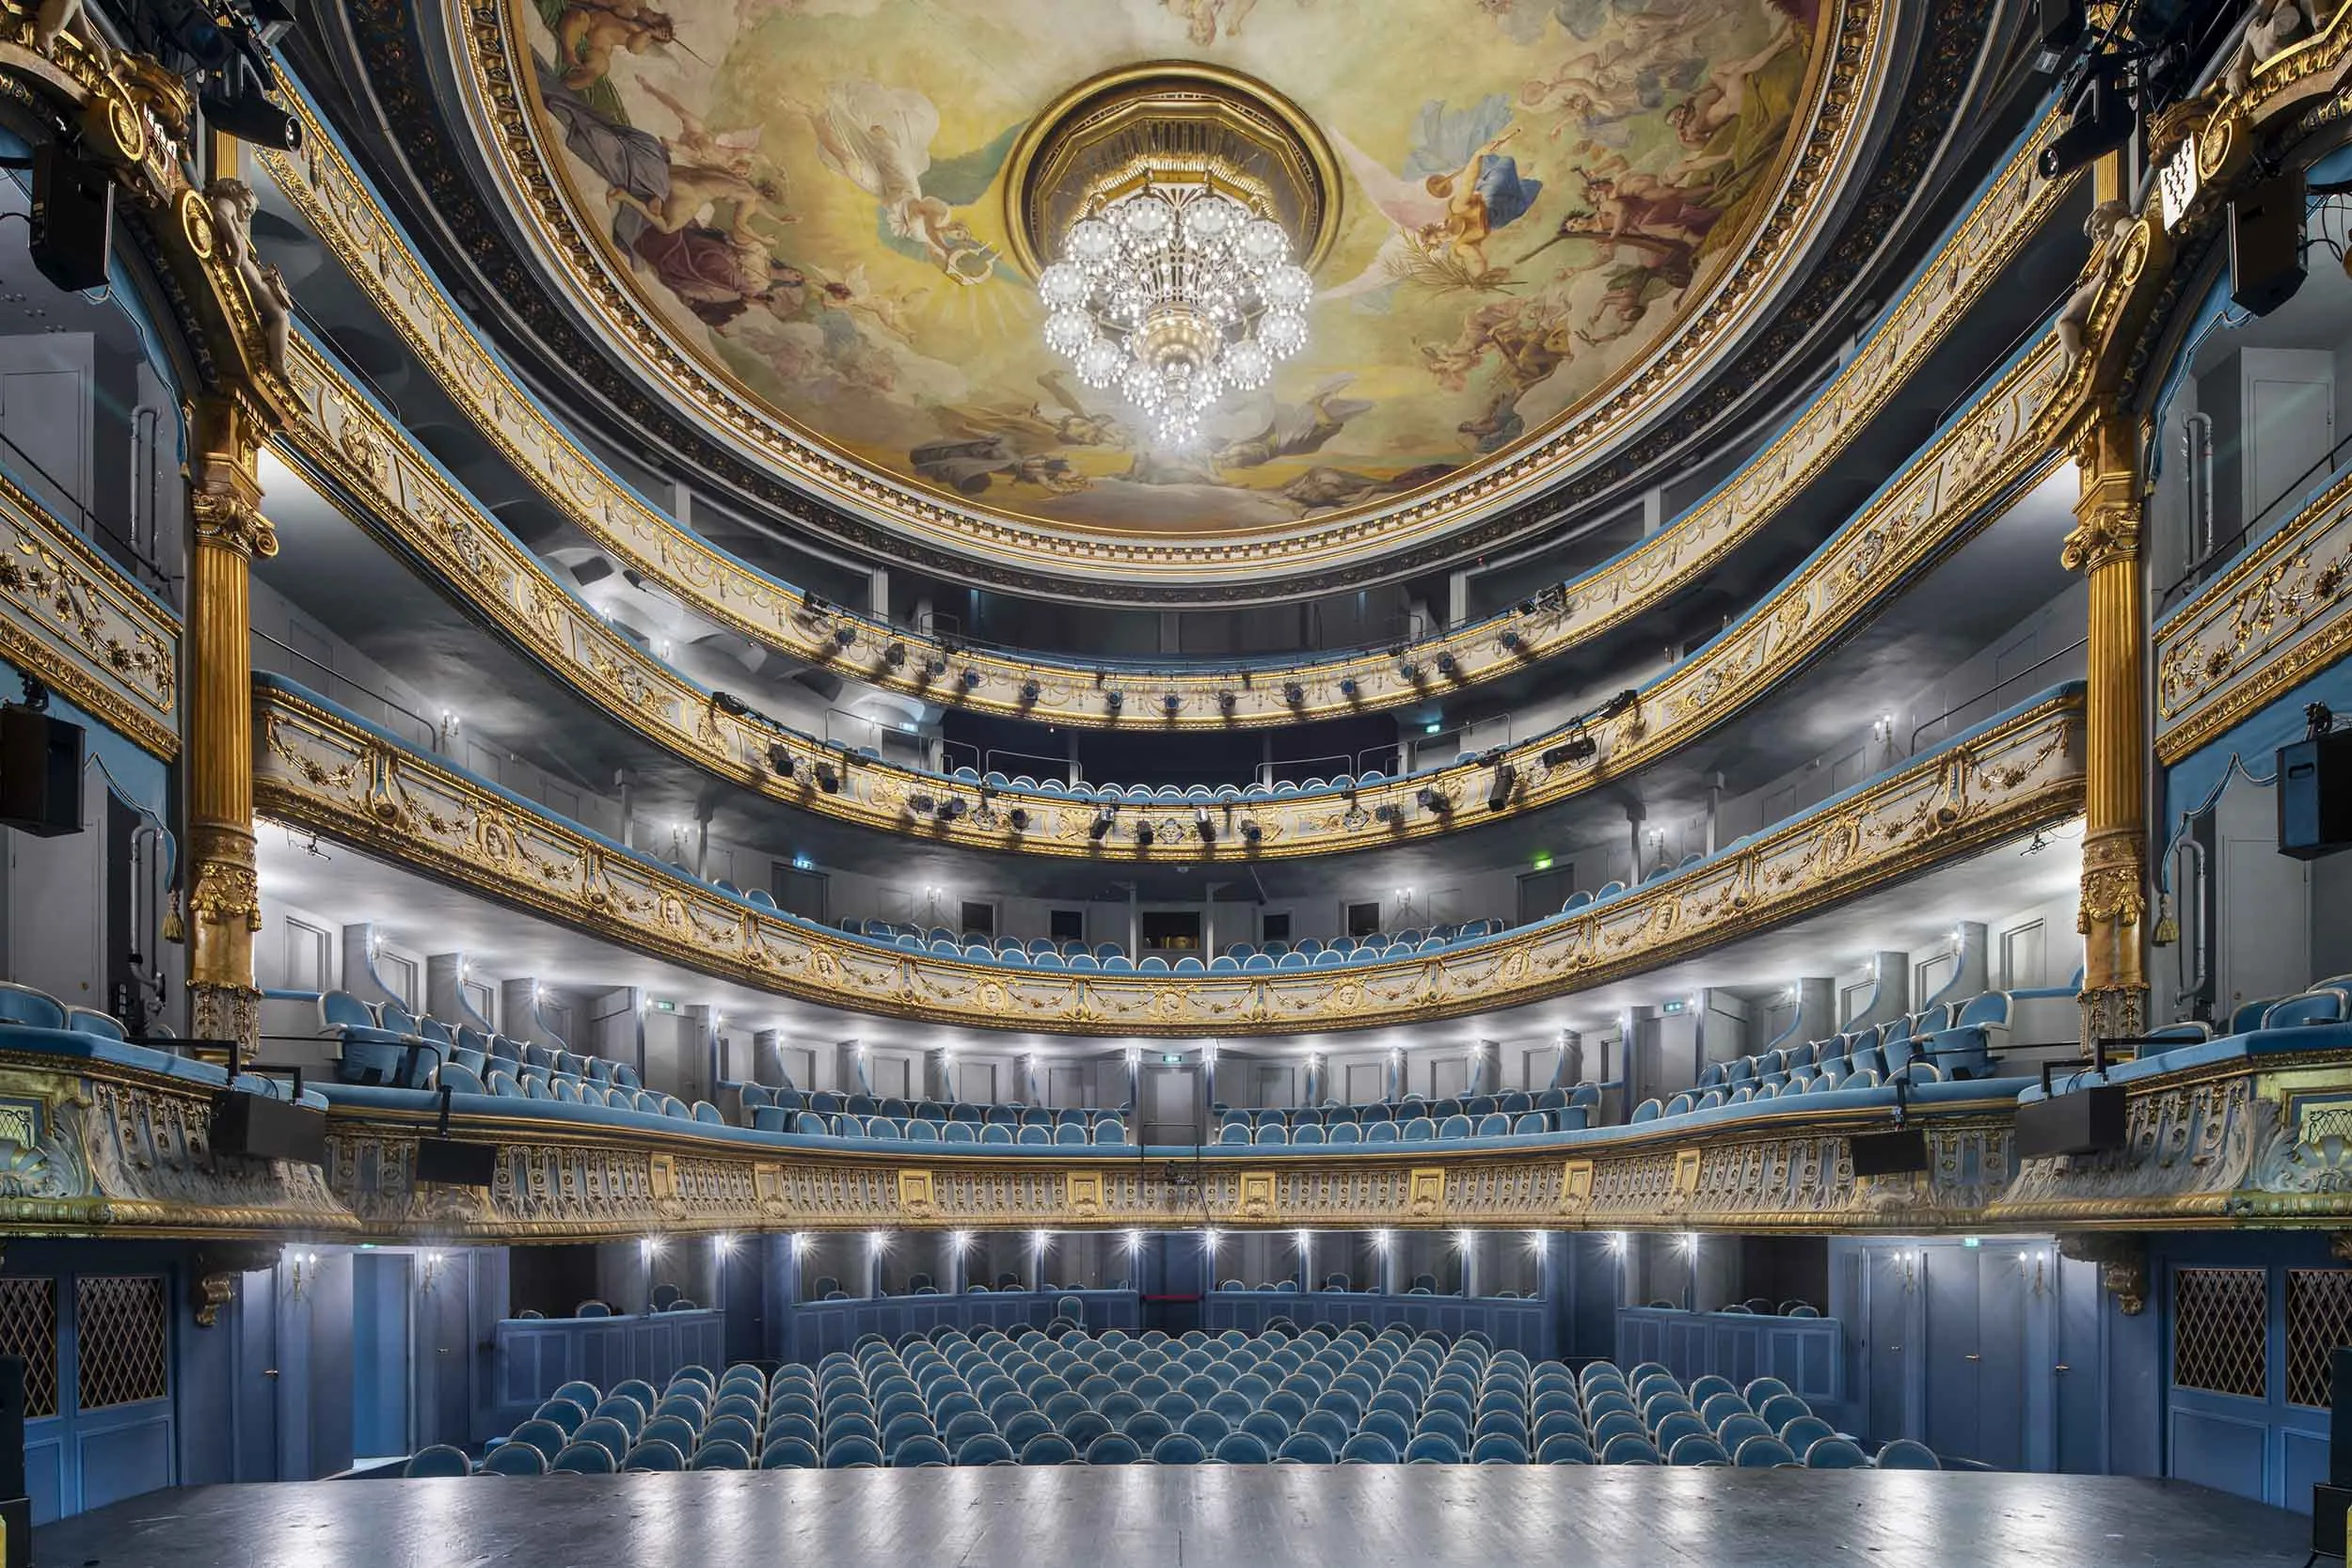 Graslin Theater in France, Europe | Theaters - Rated 3.8